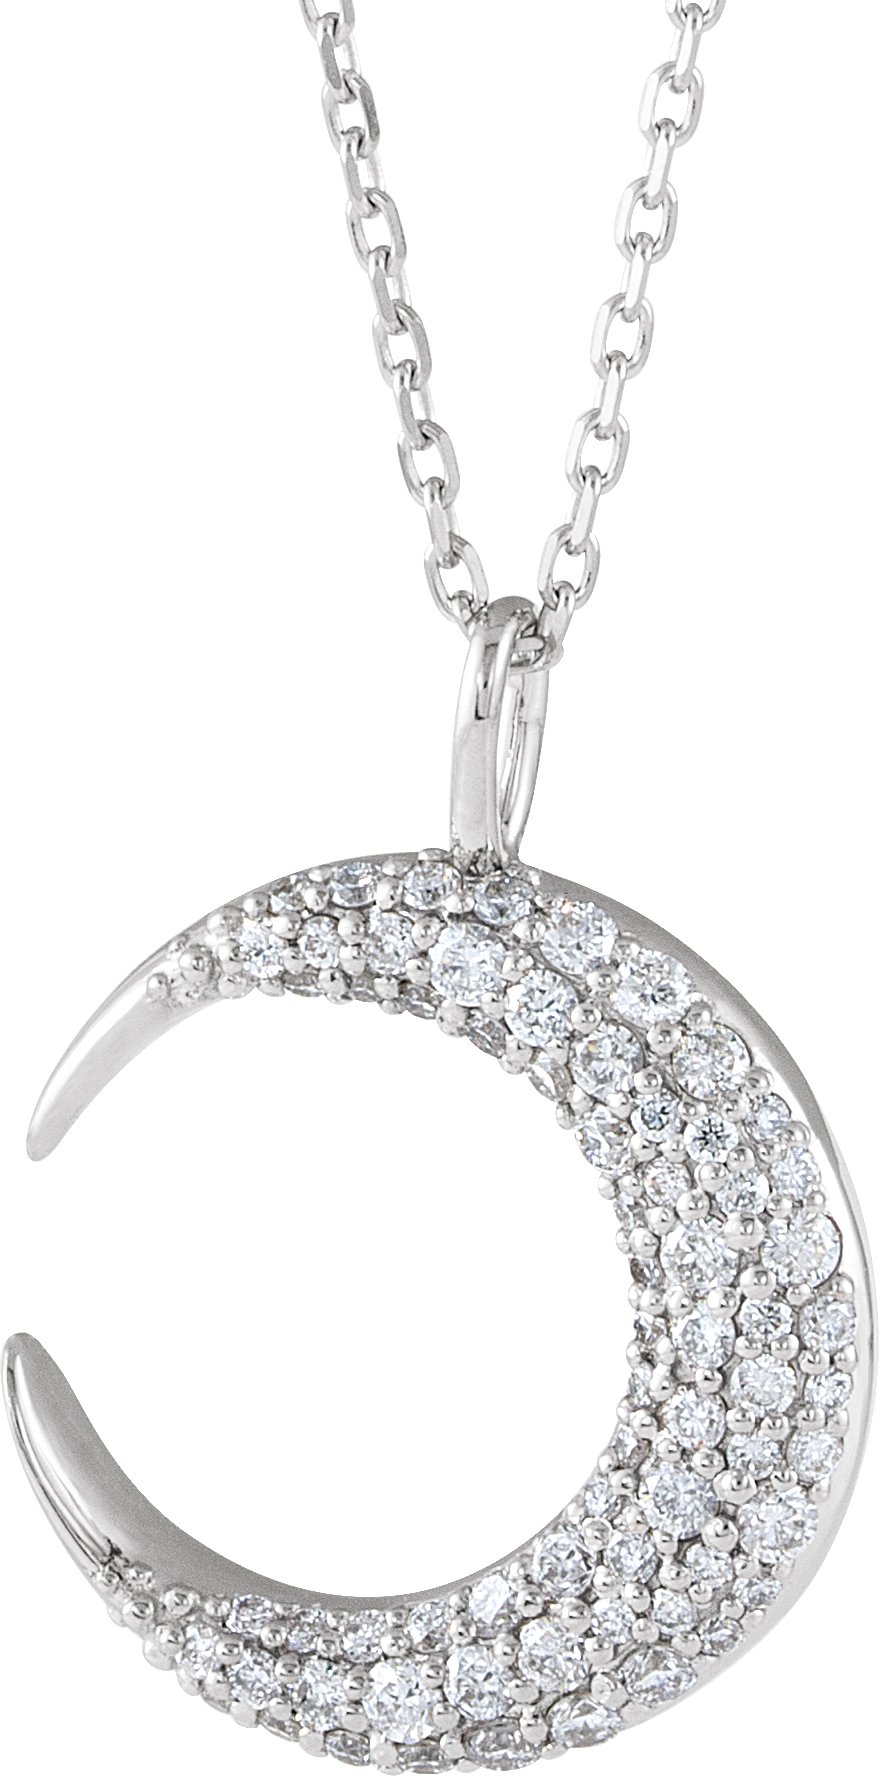 Accented Crescent Moon Necklace or Pendant